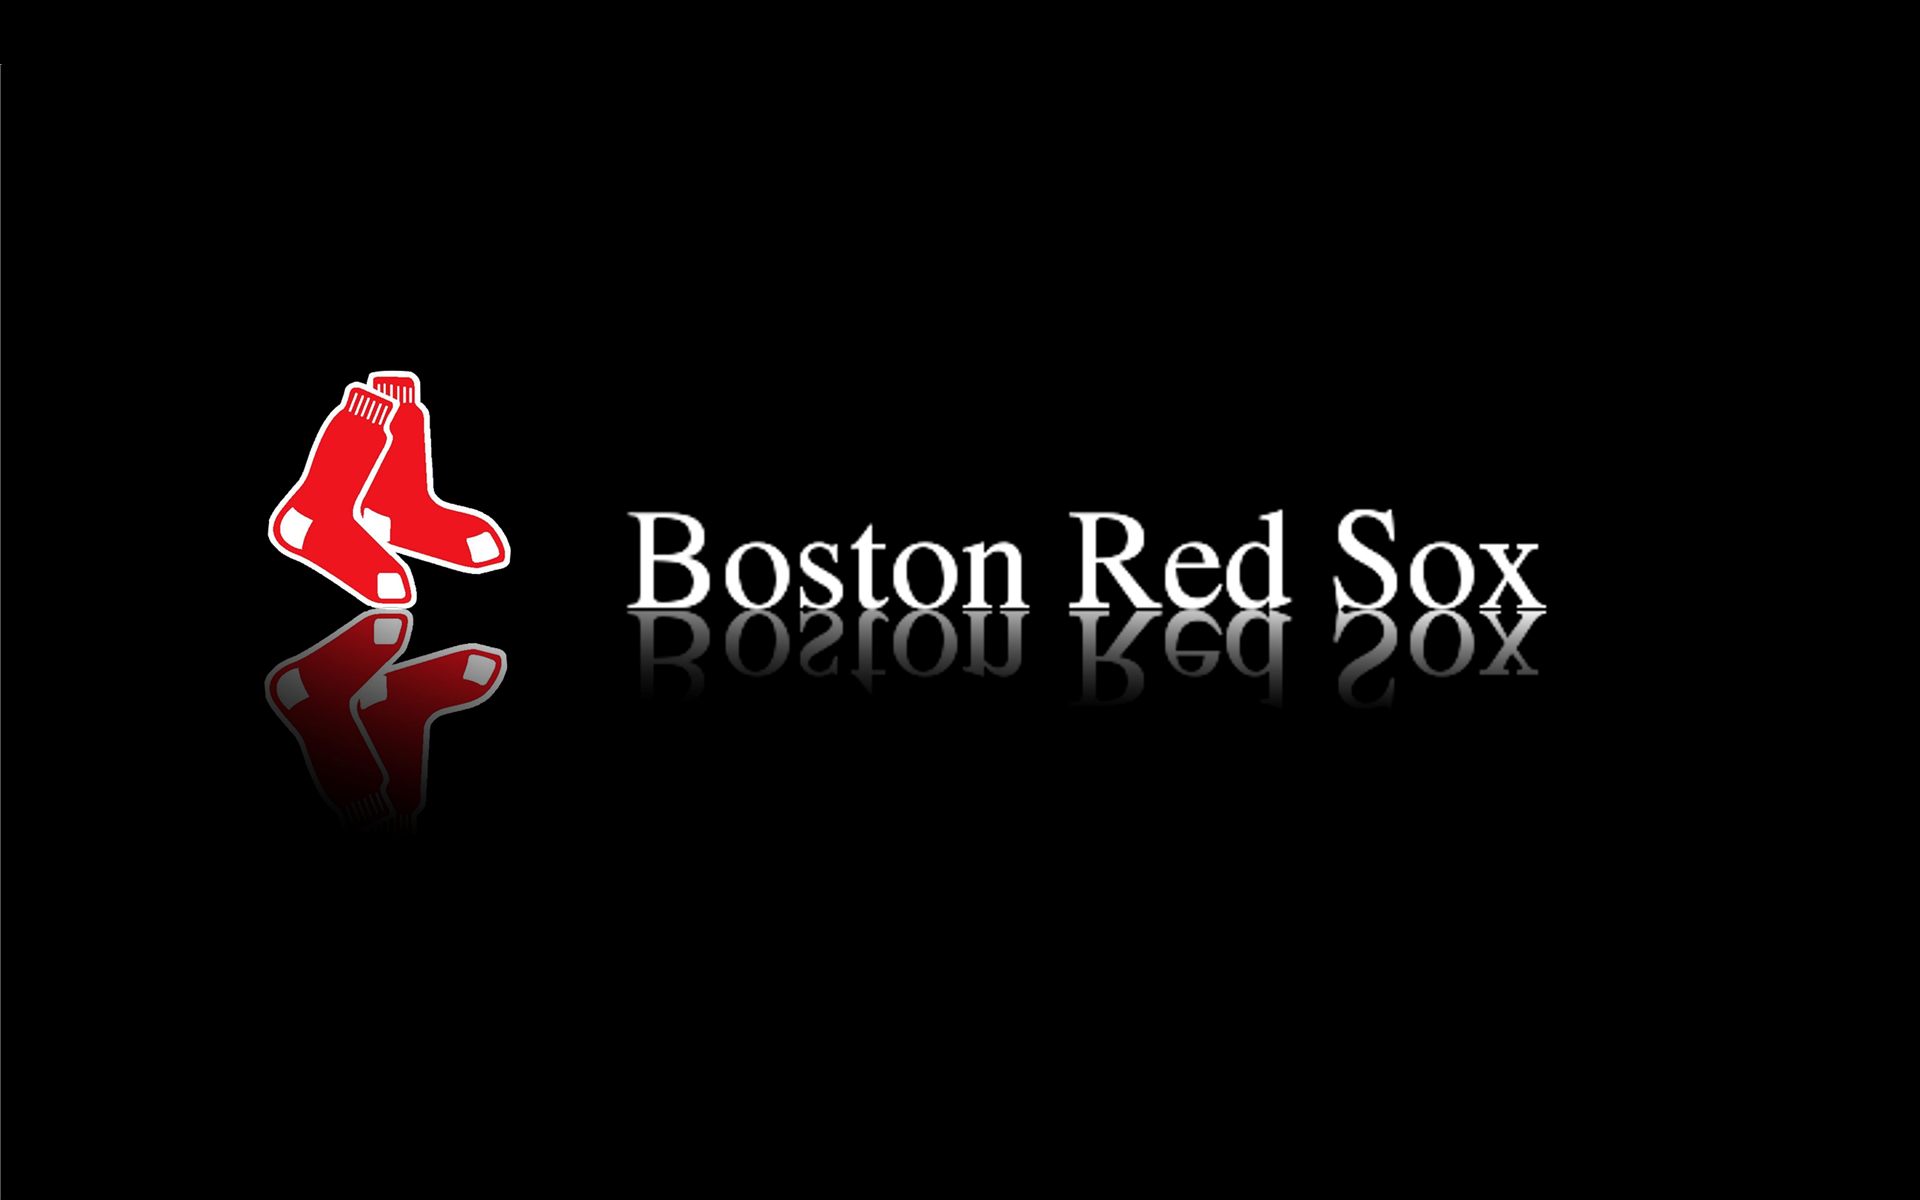 Decorate Your Devices with Boston Red Sox Wallpaper  Free Downloads